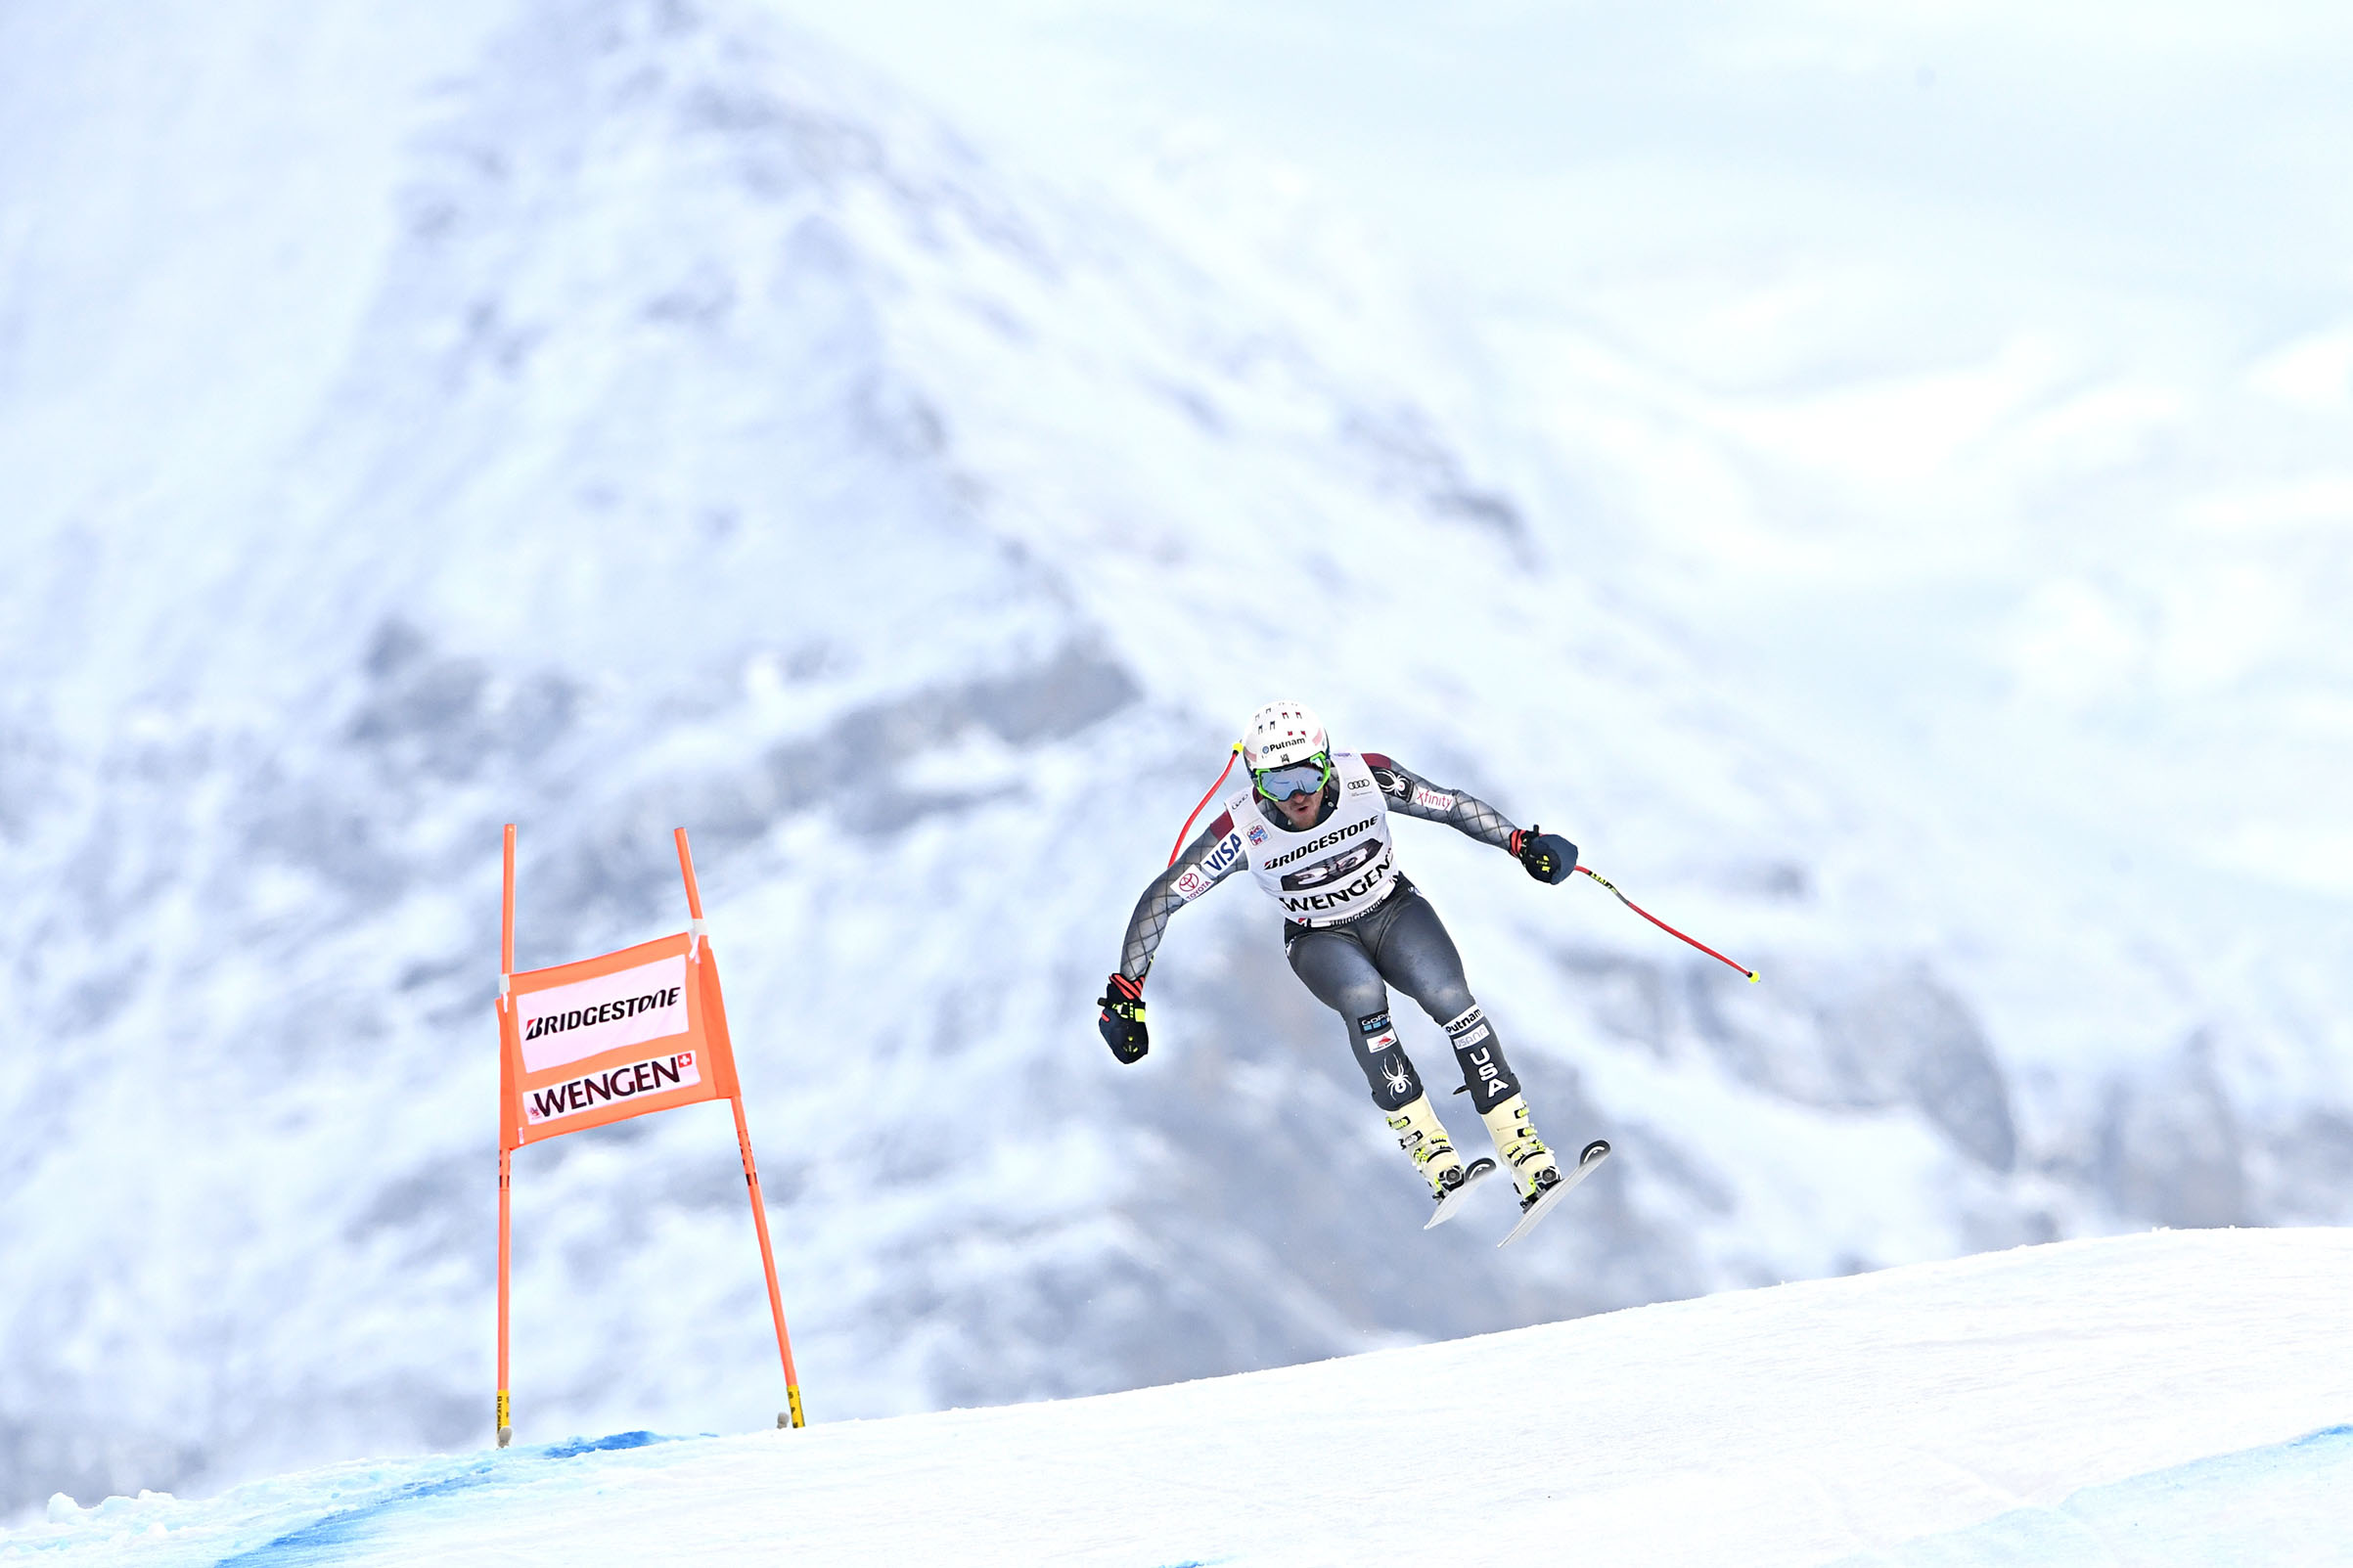 Ted Ligety of USA in action during the Audi FIS Alpine Ski World Cup Men's Combined in Wengen, Switzerland, on Jan. 12, 2018. (Alain Grosclaude—Agence Zoom/Getty Images)